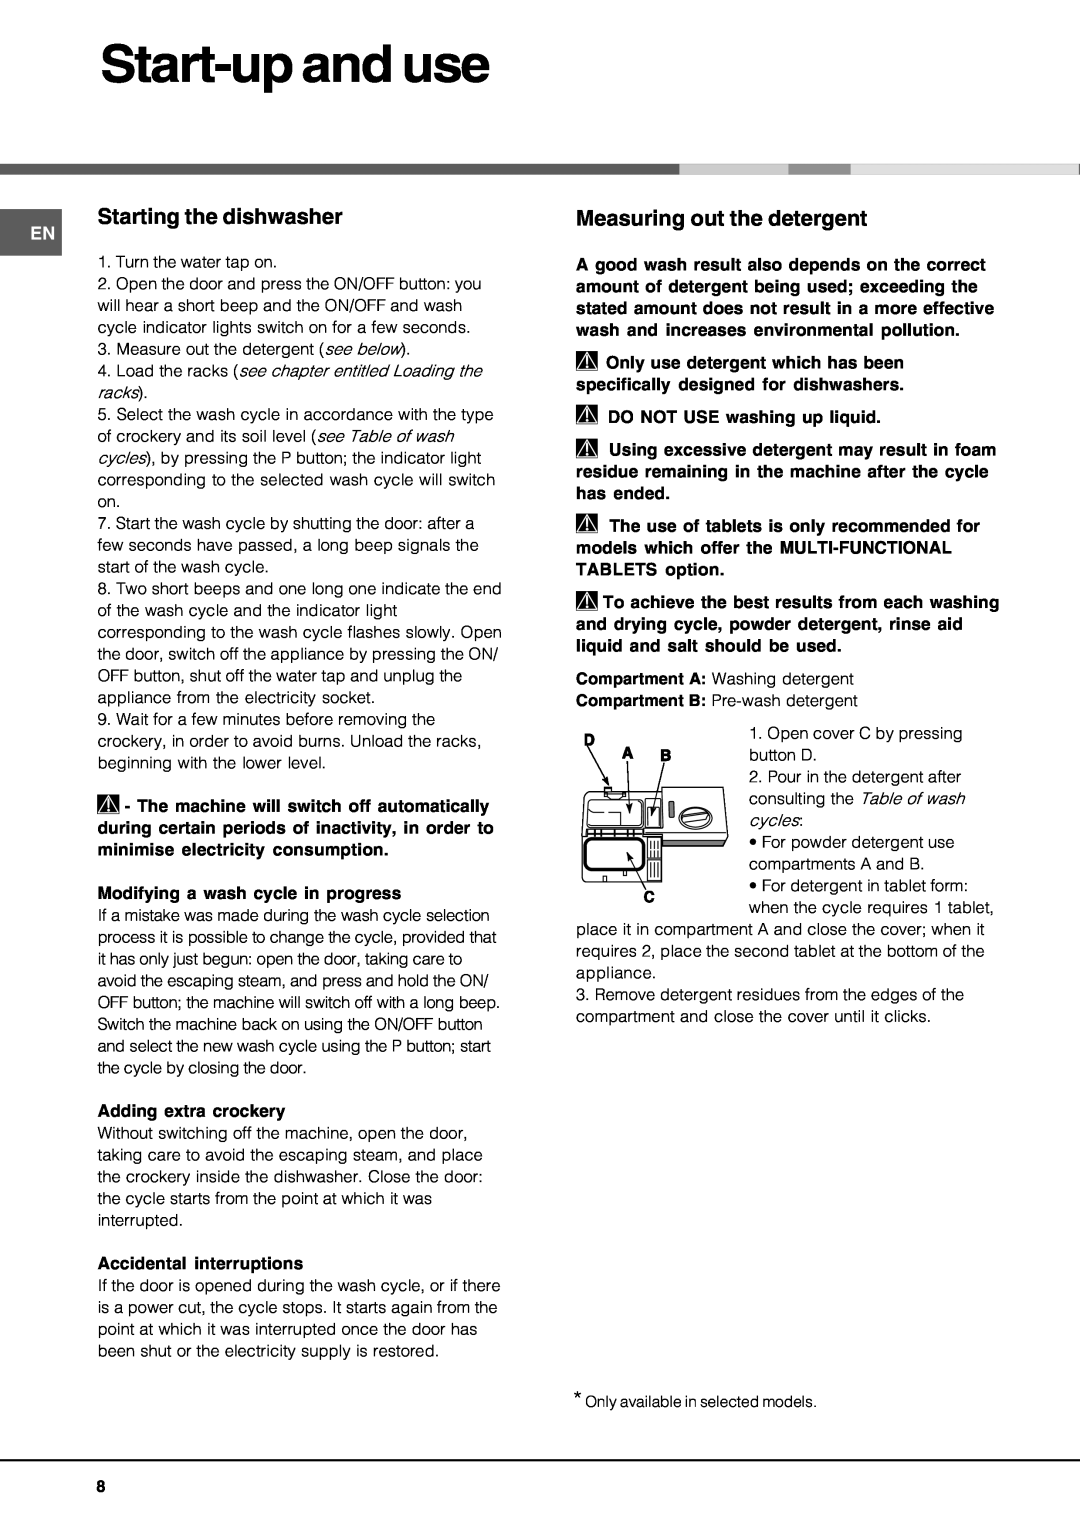 Hotpoint lft 114 manual Start-up and use, Starting the dishwasher, Measuring out the detergent 